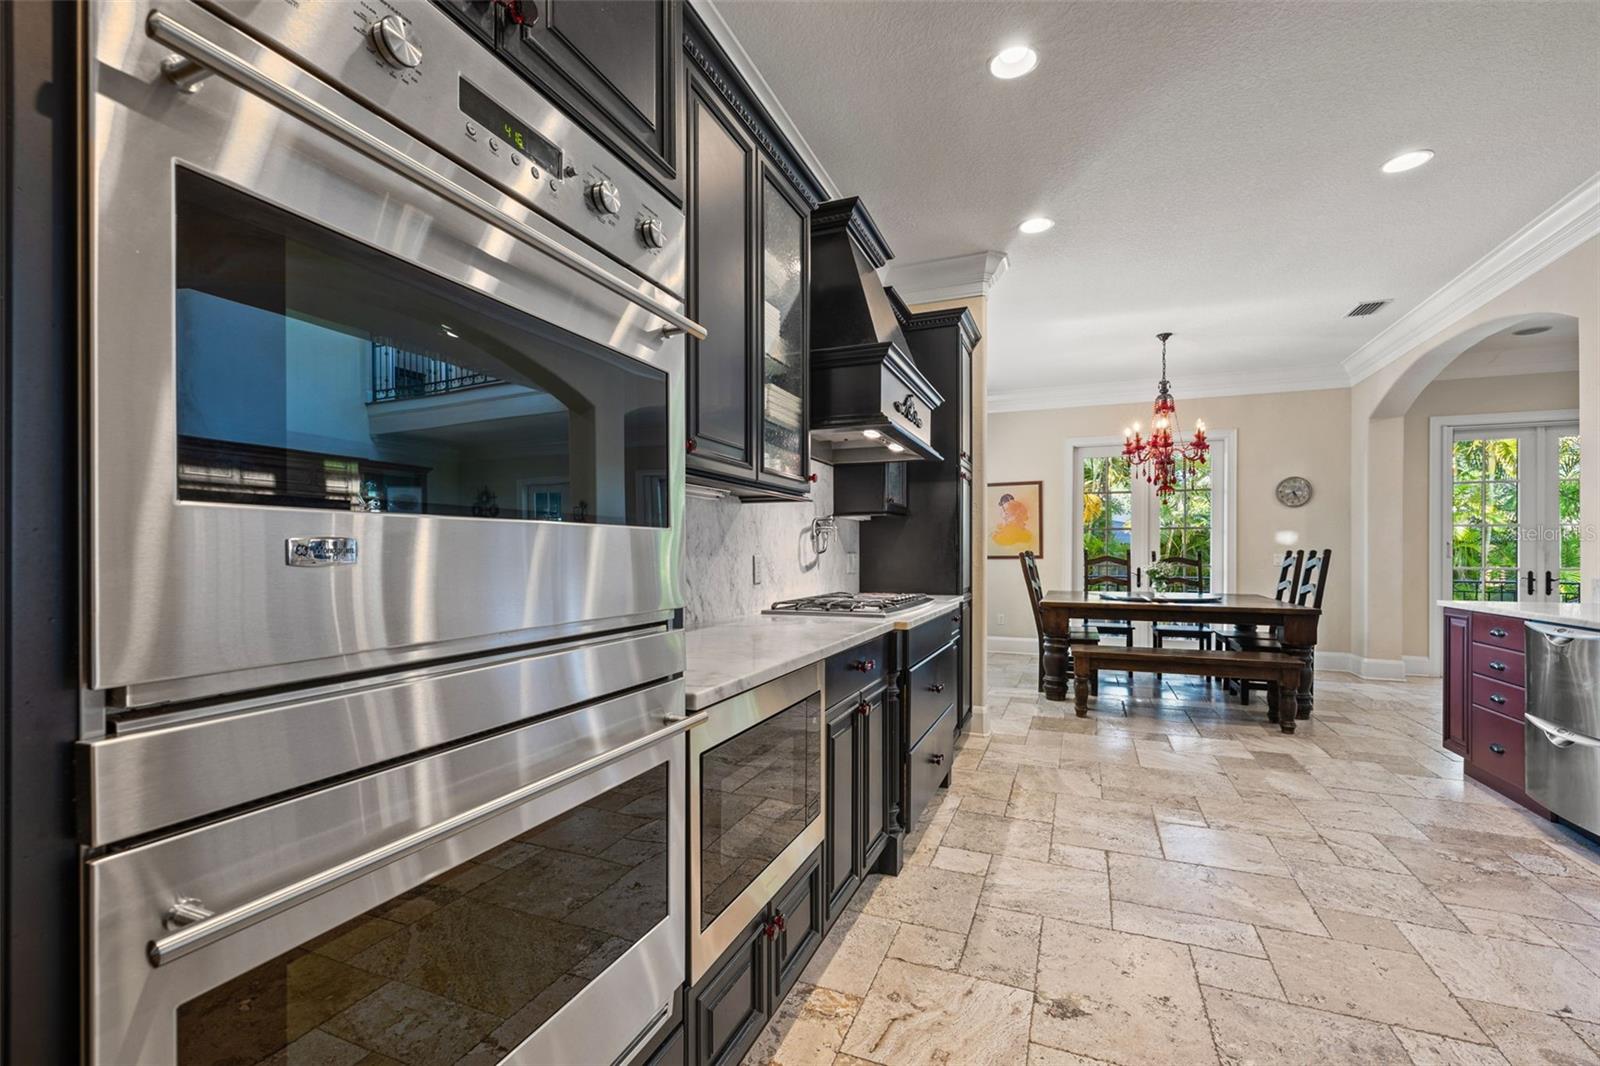 Built-in double ovens